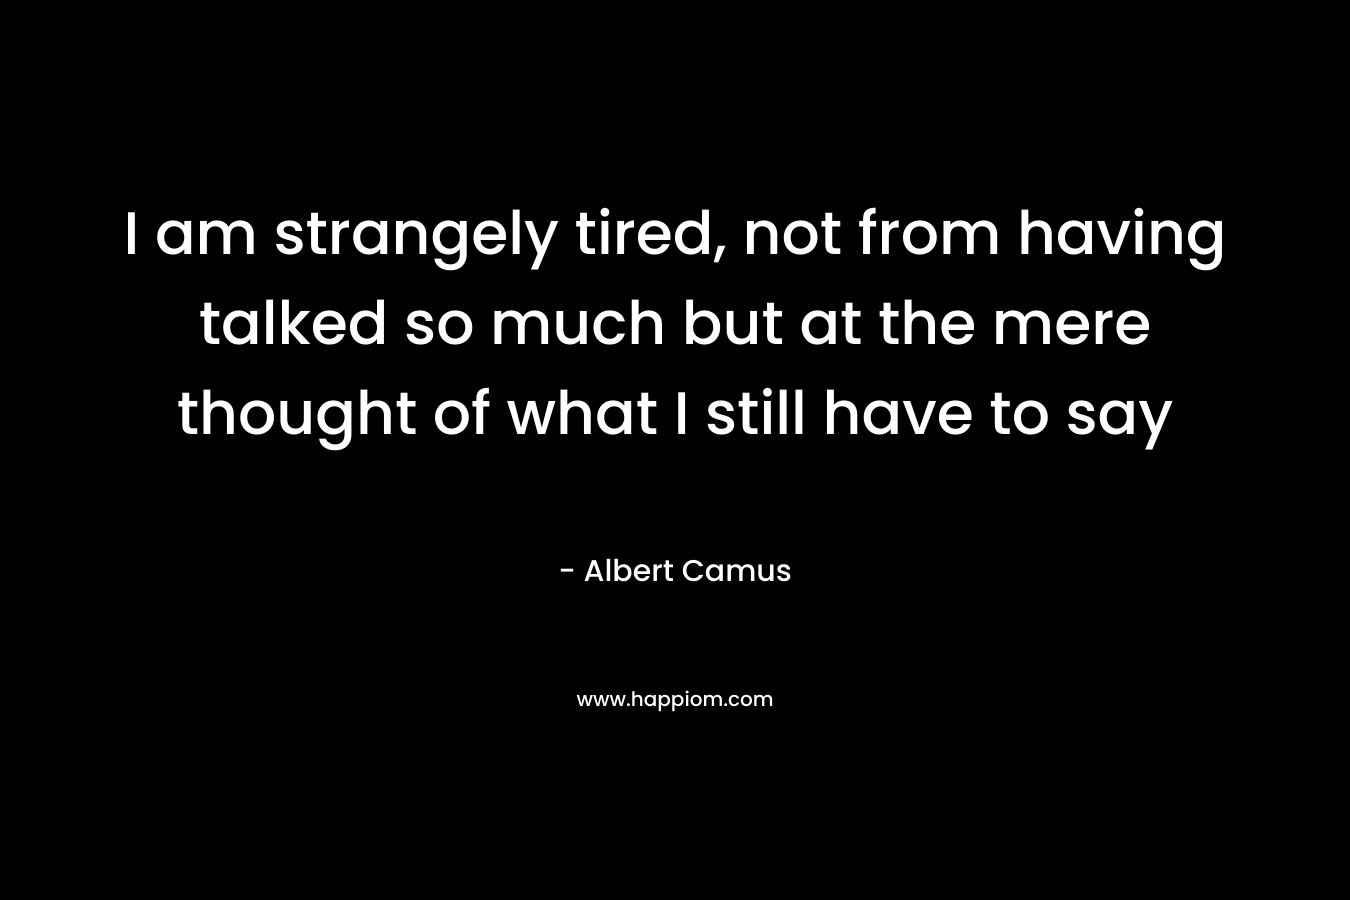 I am strangely tired, not from having talked so much but at the mere thought of what I still have to say – Albert Camus